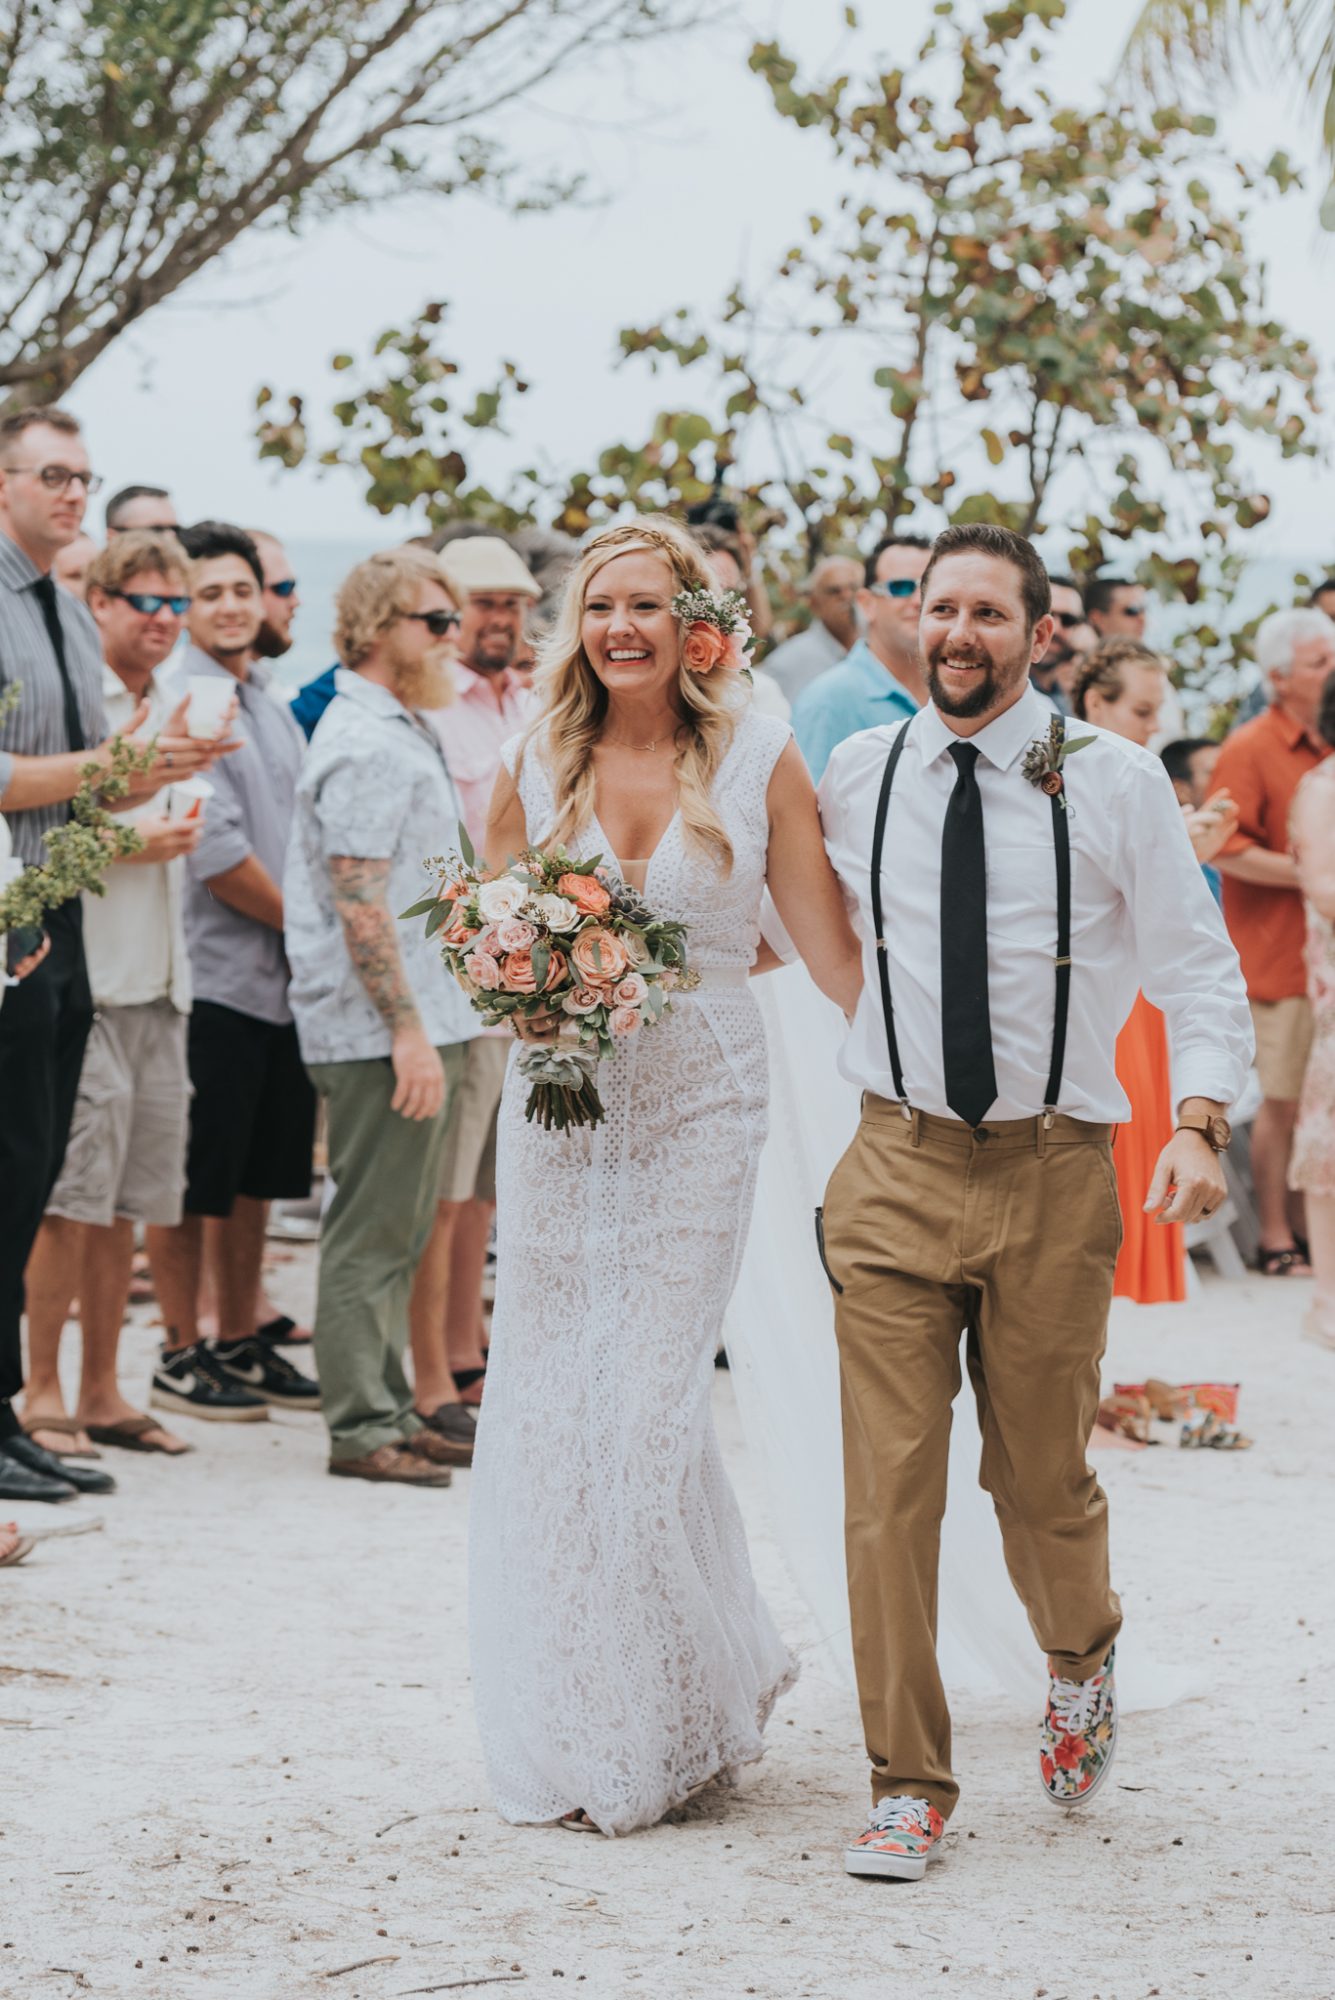 Amy and Teddy, a bride and groom, walking down the beach after their Key West wedding ceremony.